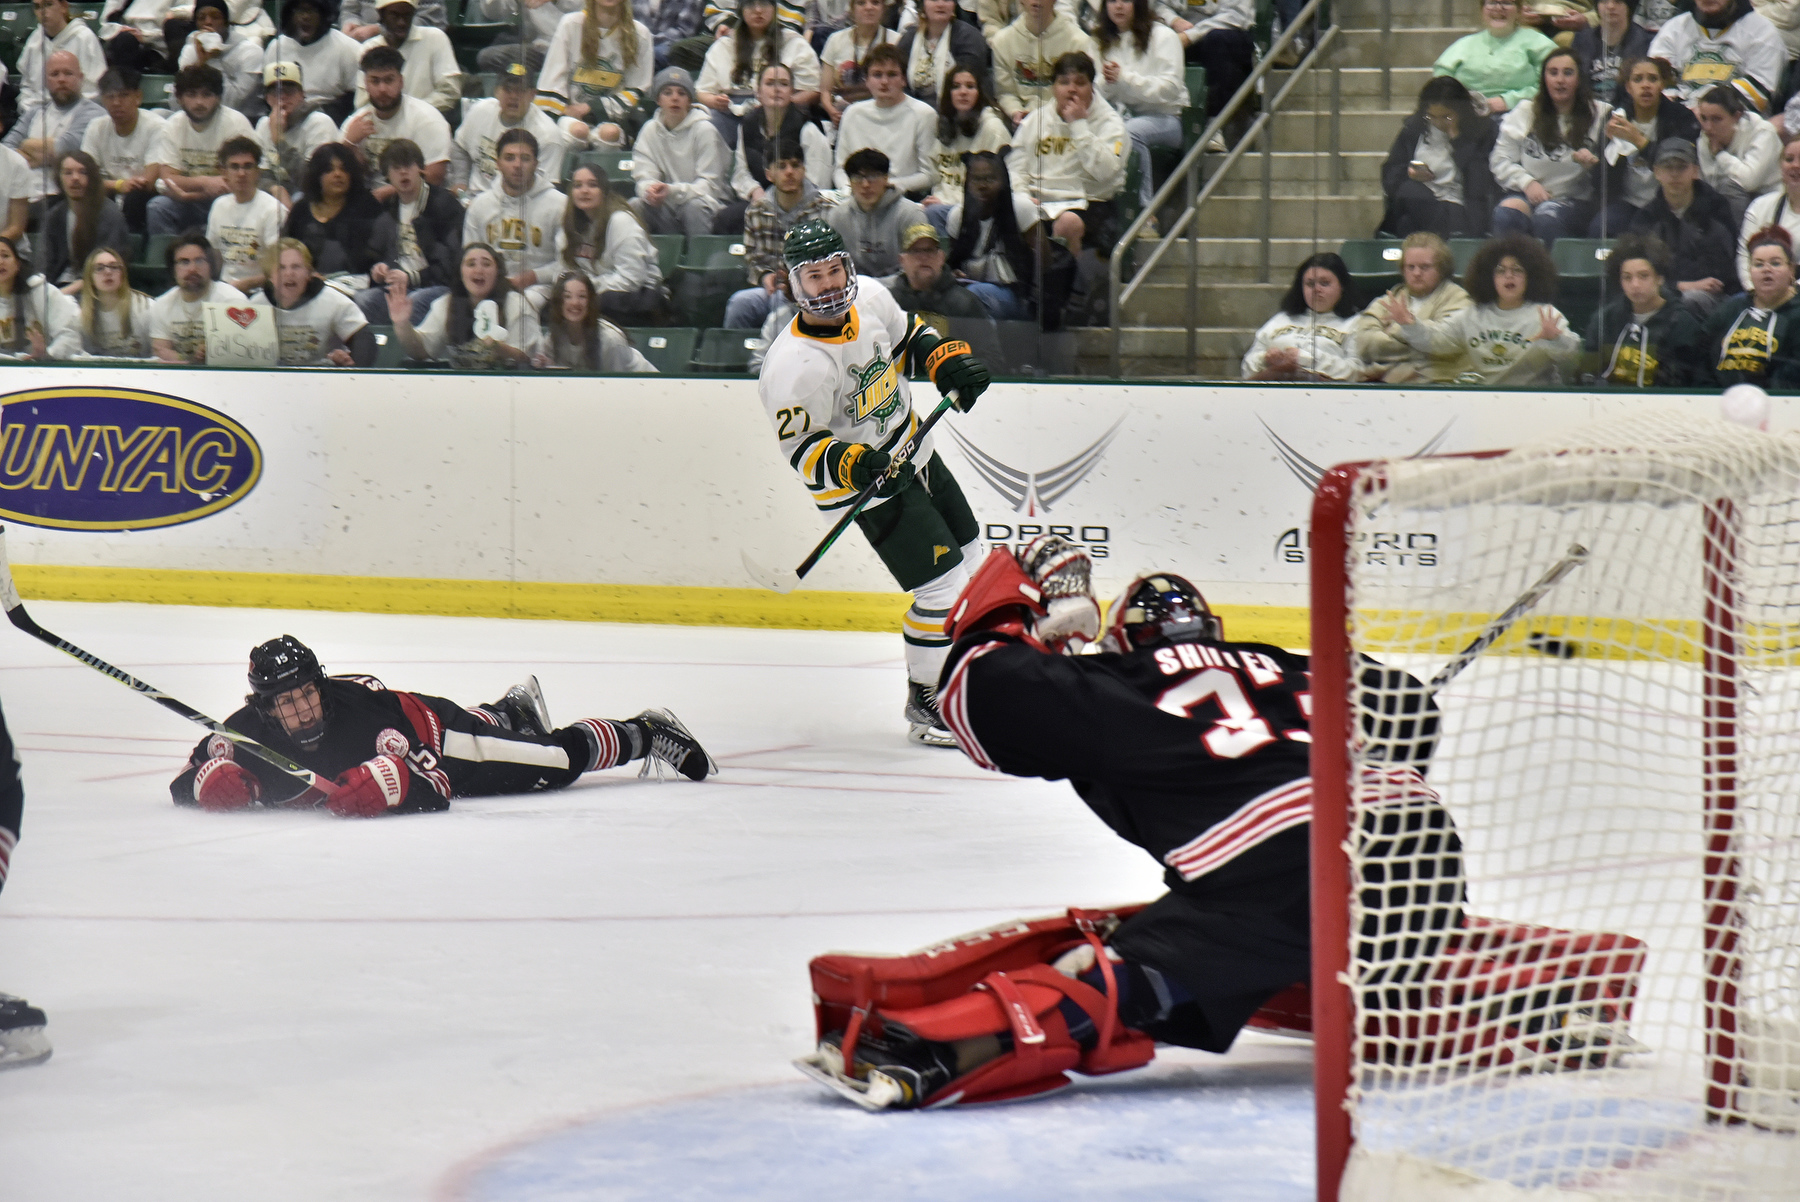 Laker senior forward AJ Ryan (#27) makes Oswego's third goal in third-period action during the annual Whiteout men's hockey contest between arch rival Plattsburgh. The Lakers won the matchup 4-3. The two teams meet again on Saturday, Feb. 24, in the Deborah F. Stanley Arena and Convocation Center in the SUNYAC semifinals.